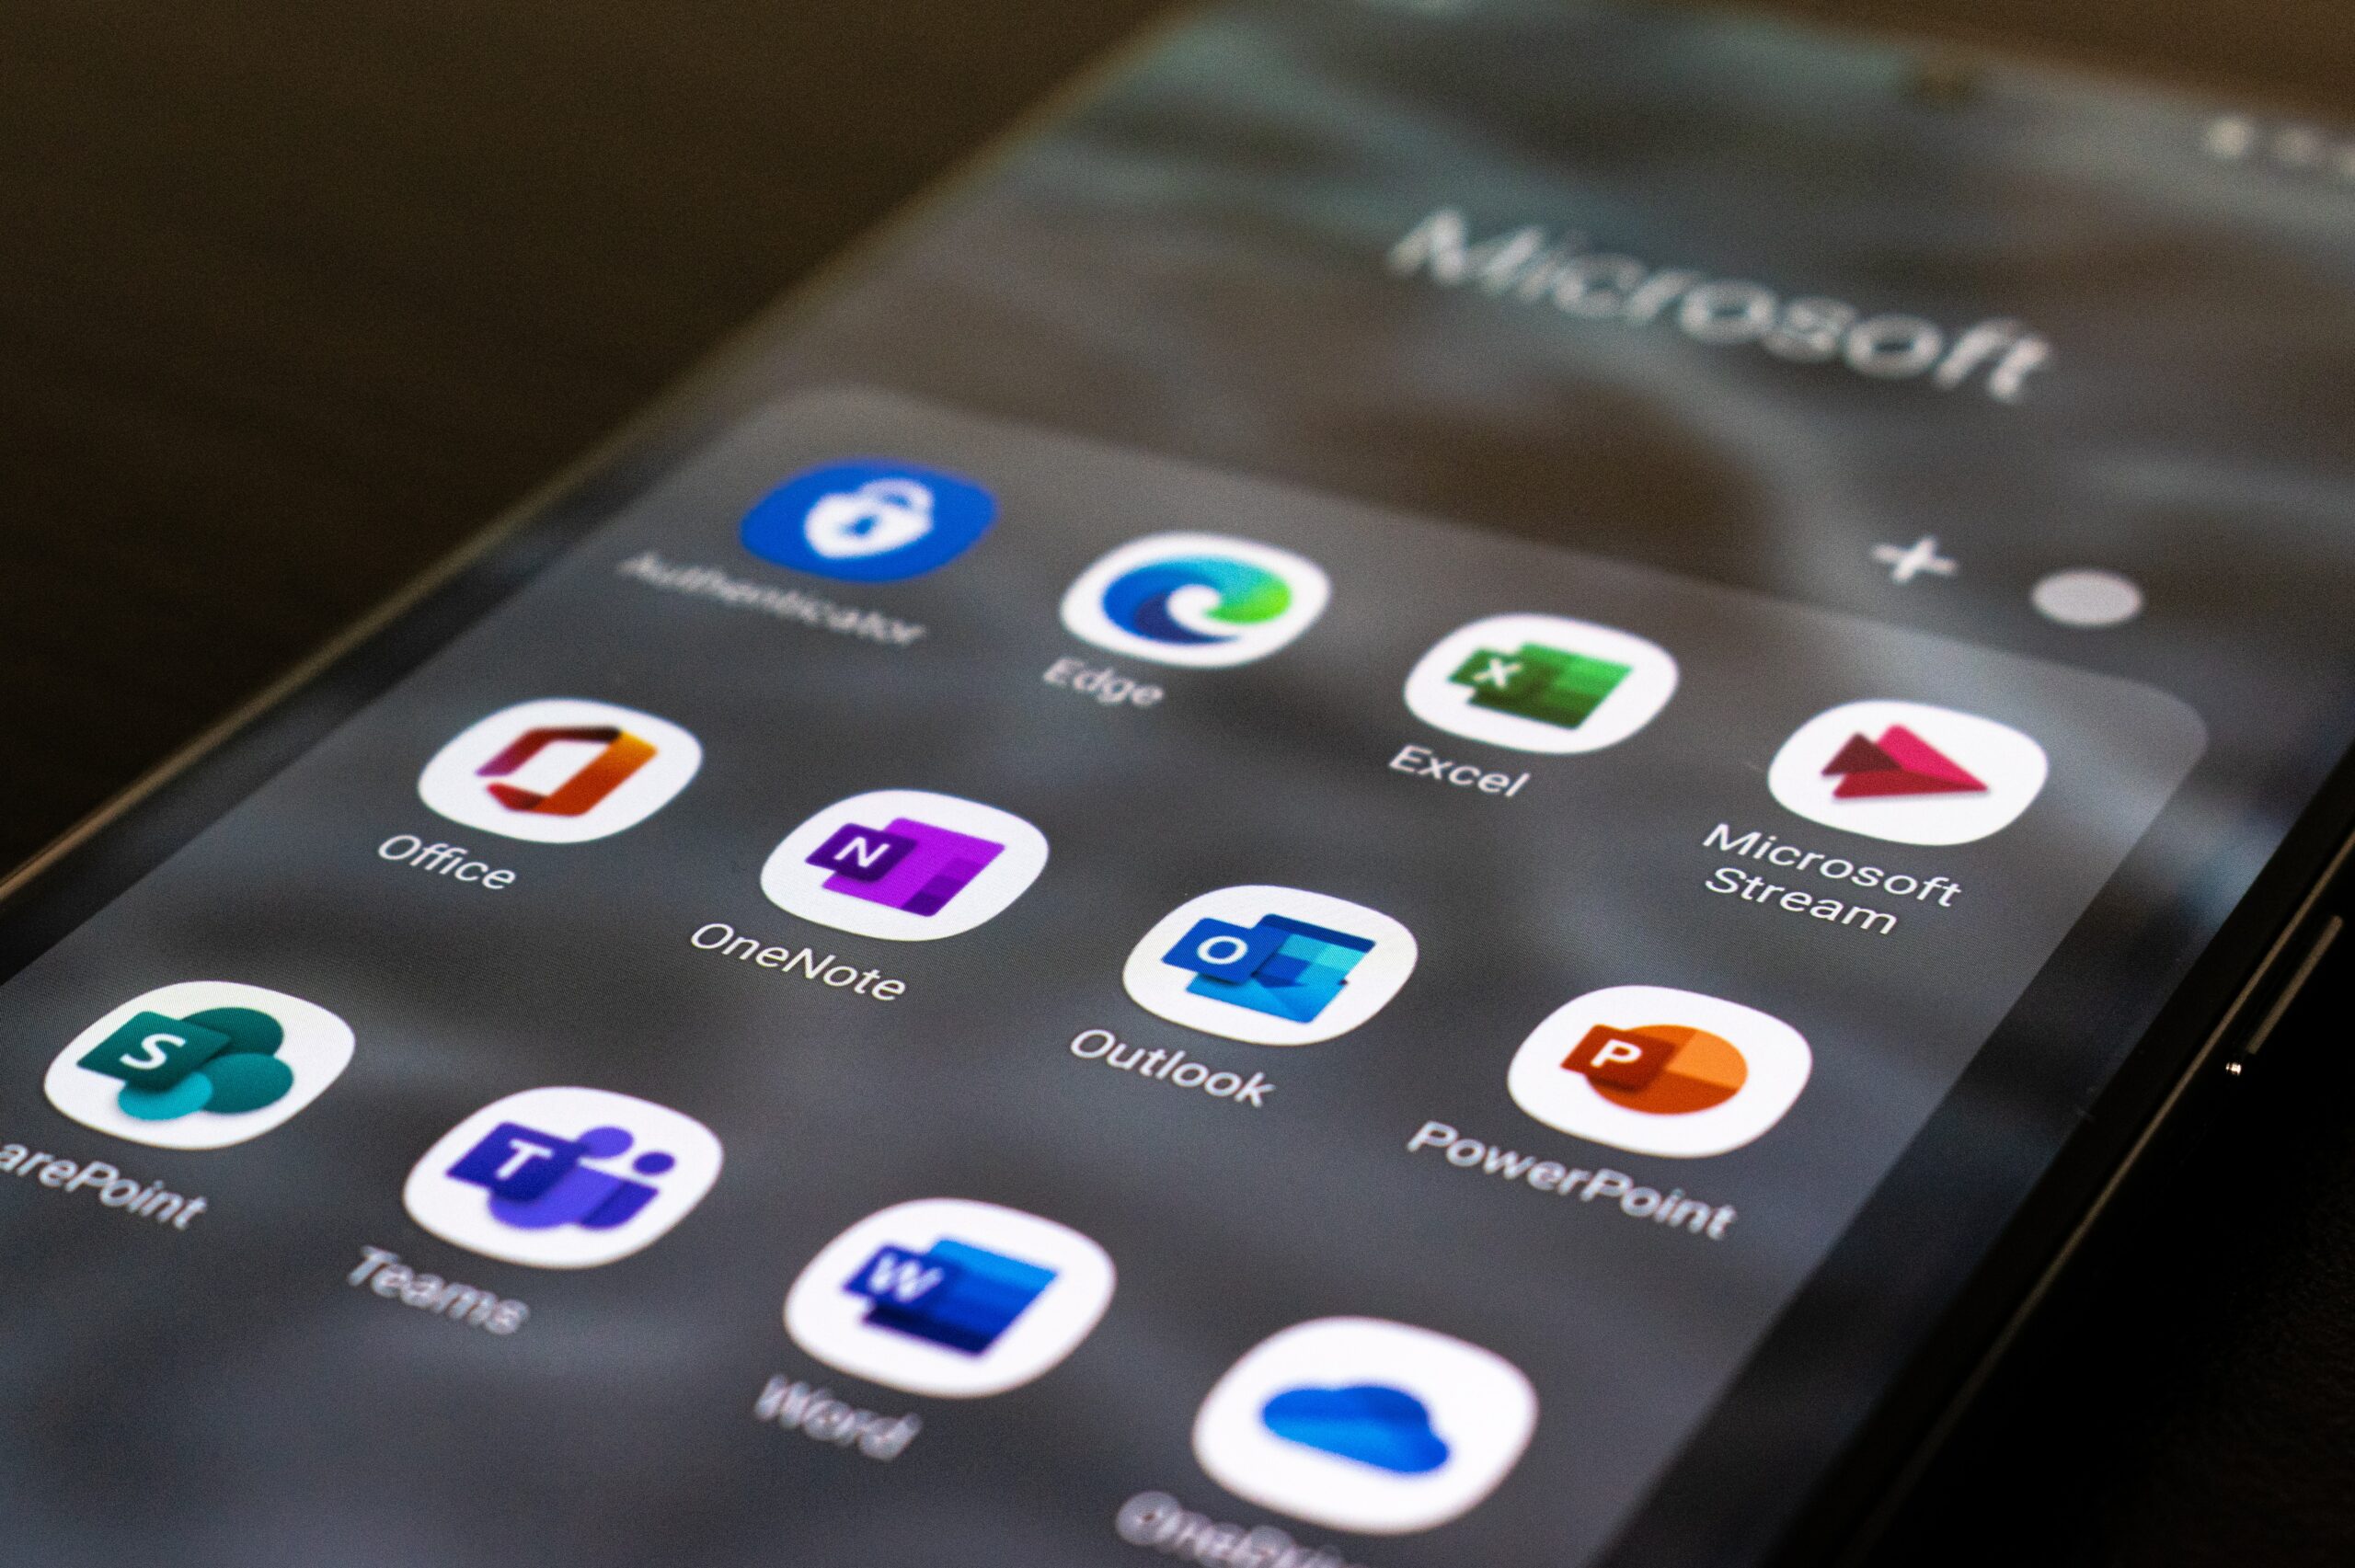 Microsoft Office app on a smartphone that allows users to sync files with Microsoft OneDrive.